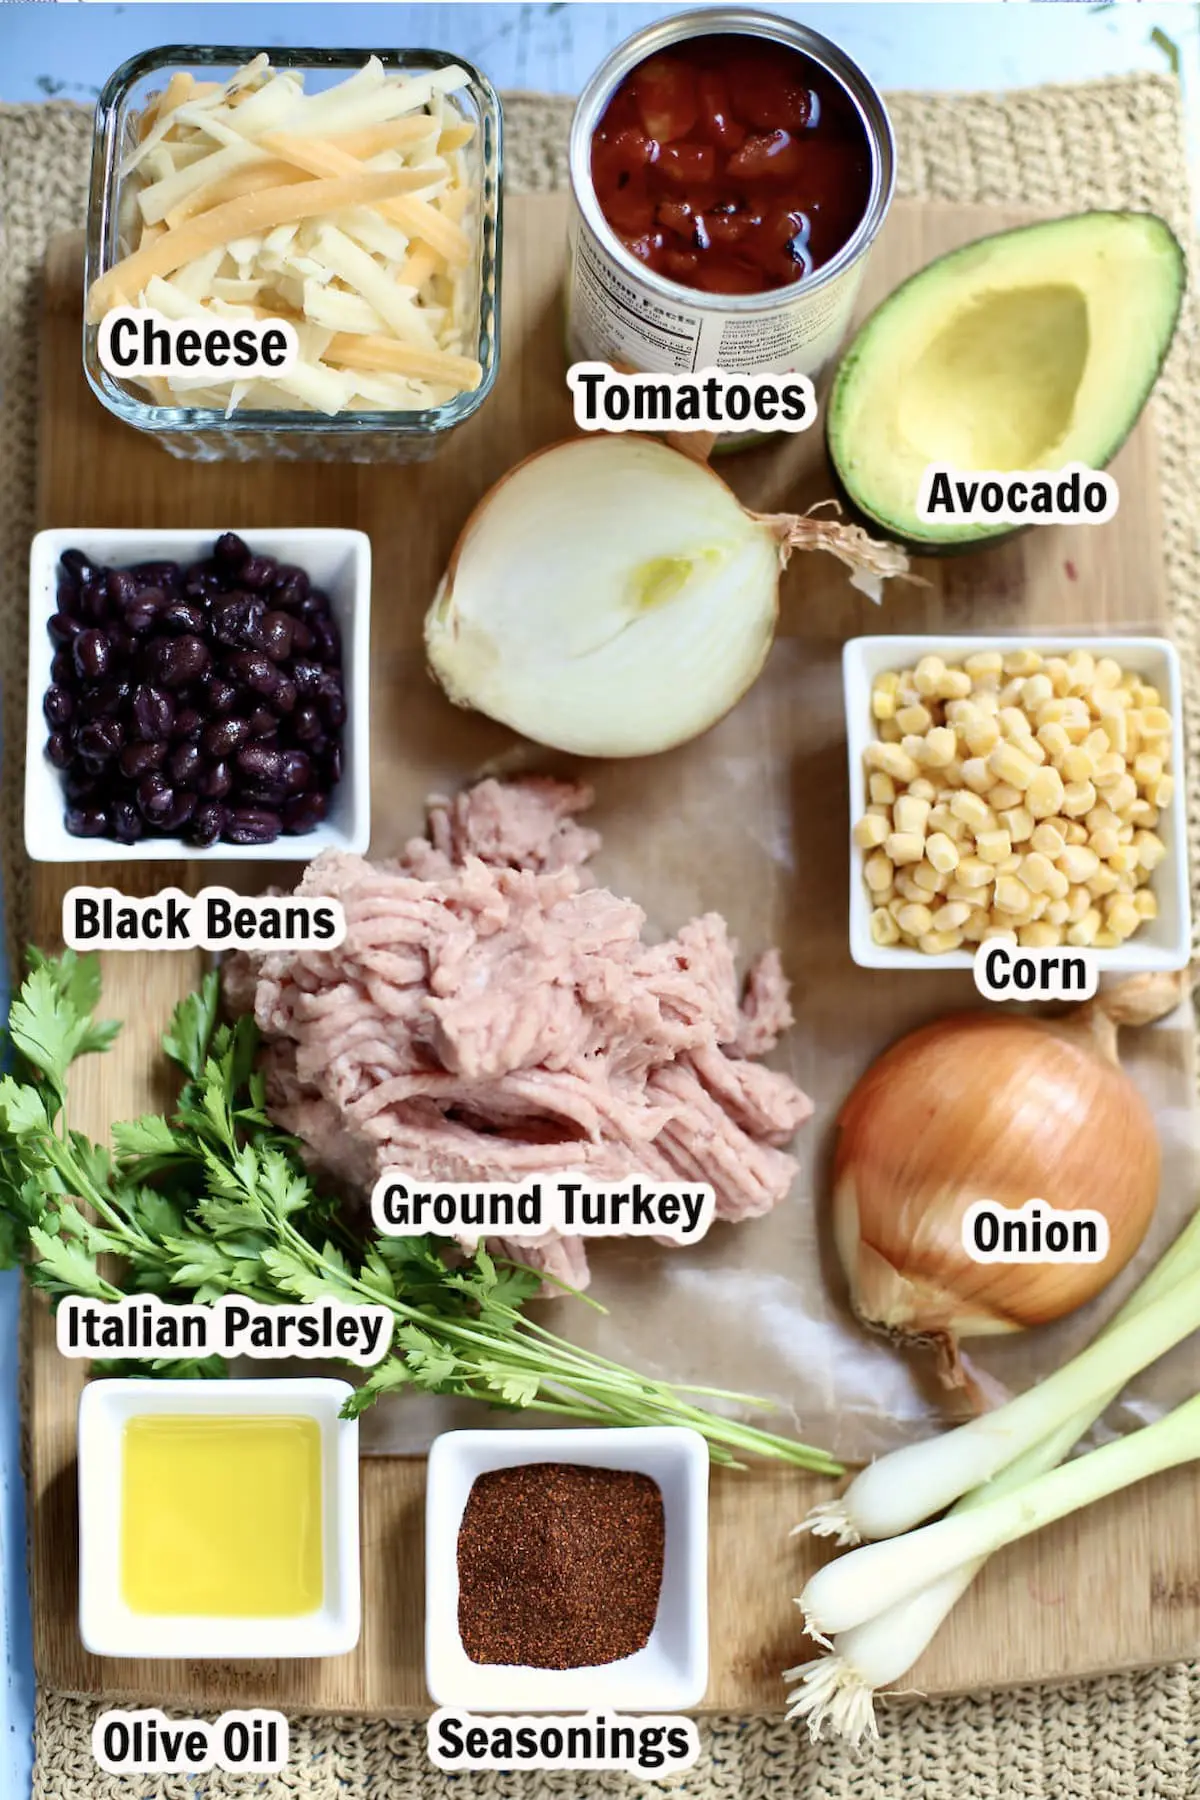 ingredients for a recipe marked with text overlay. Ground turkey, onion, black beans, cheese, avocado and corn.